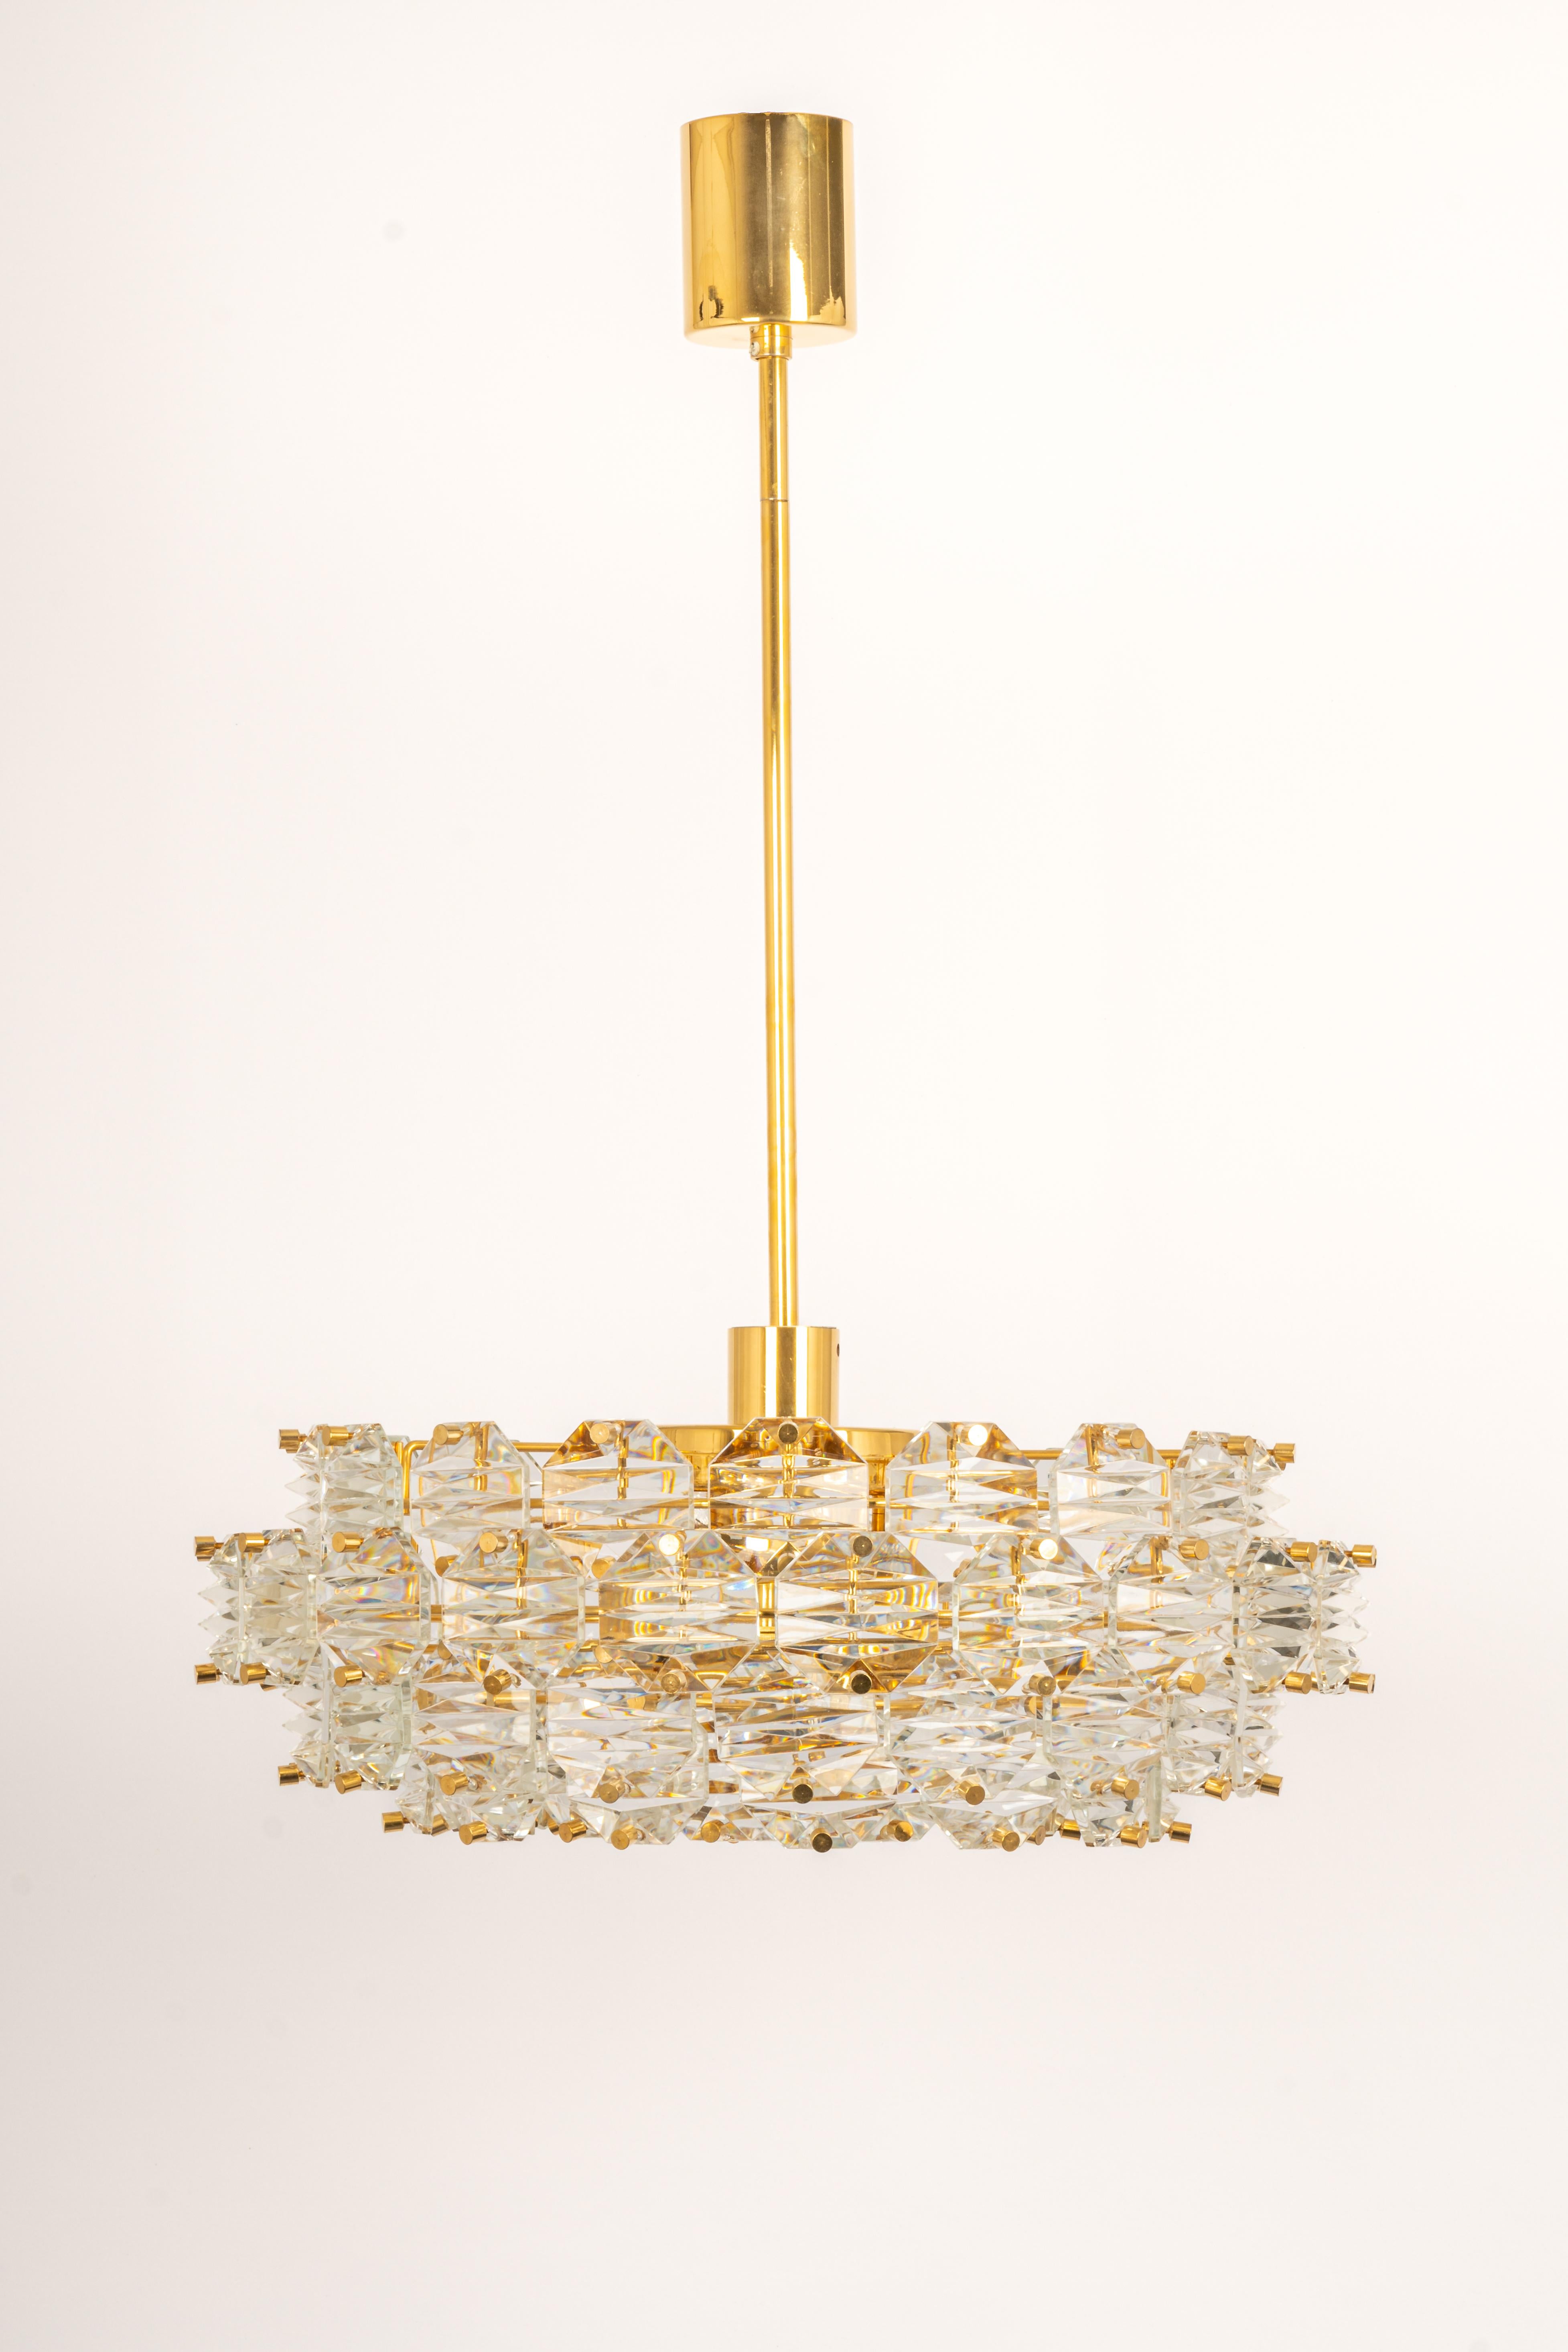 A stunning chandelier by Kinkeldey, Germany, manufactured in circa 1970-1979. A handmade and high-quality piece. The ceiling fixture and the frame are made of brass and have rings with lots of facetted crystal glass elements.

Heavy quality and in